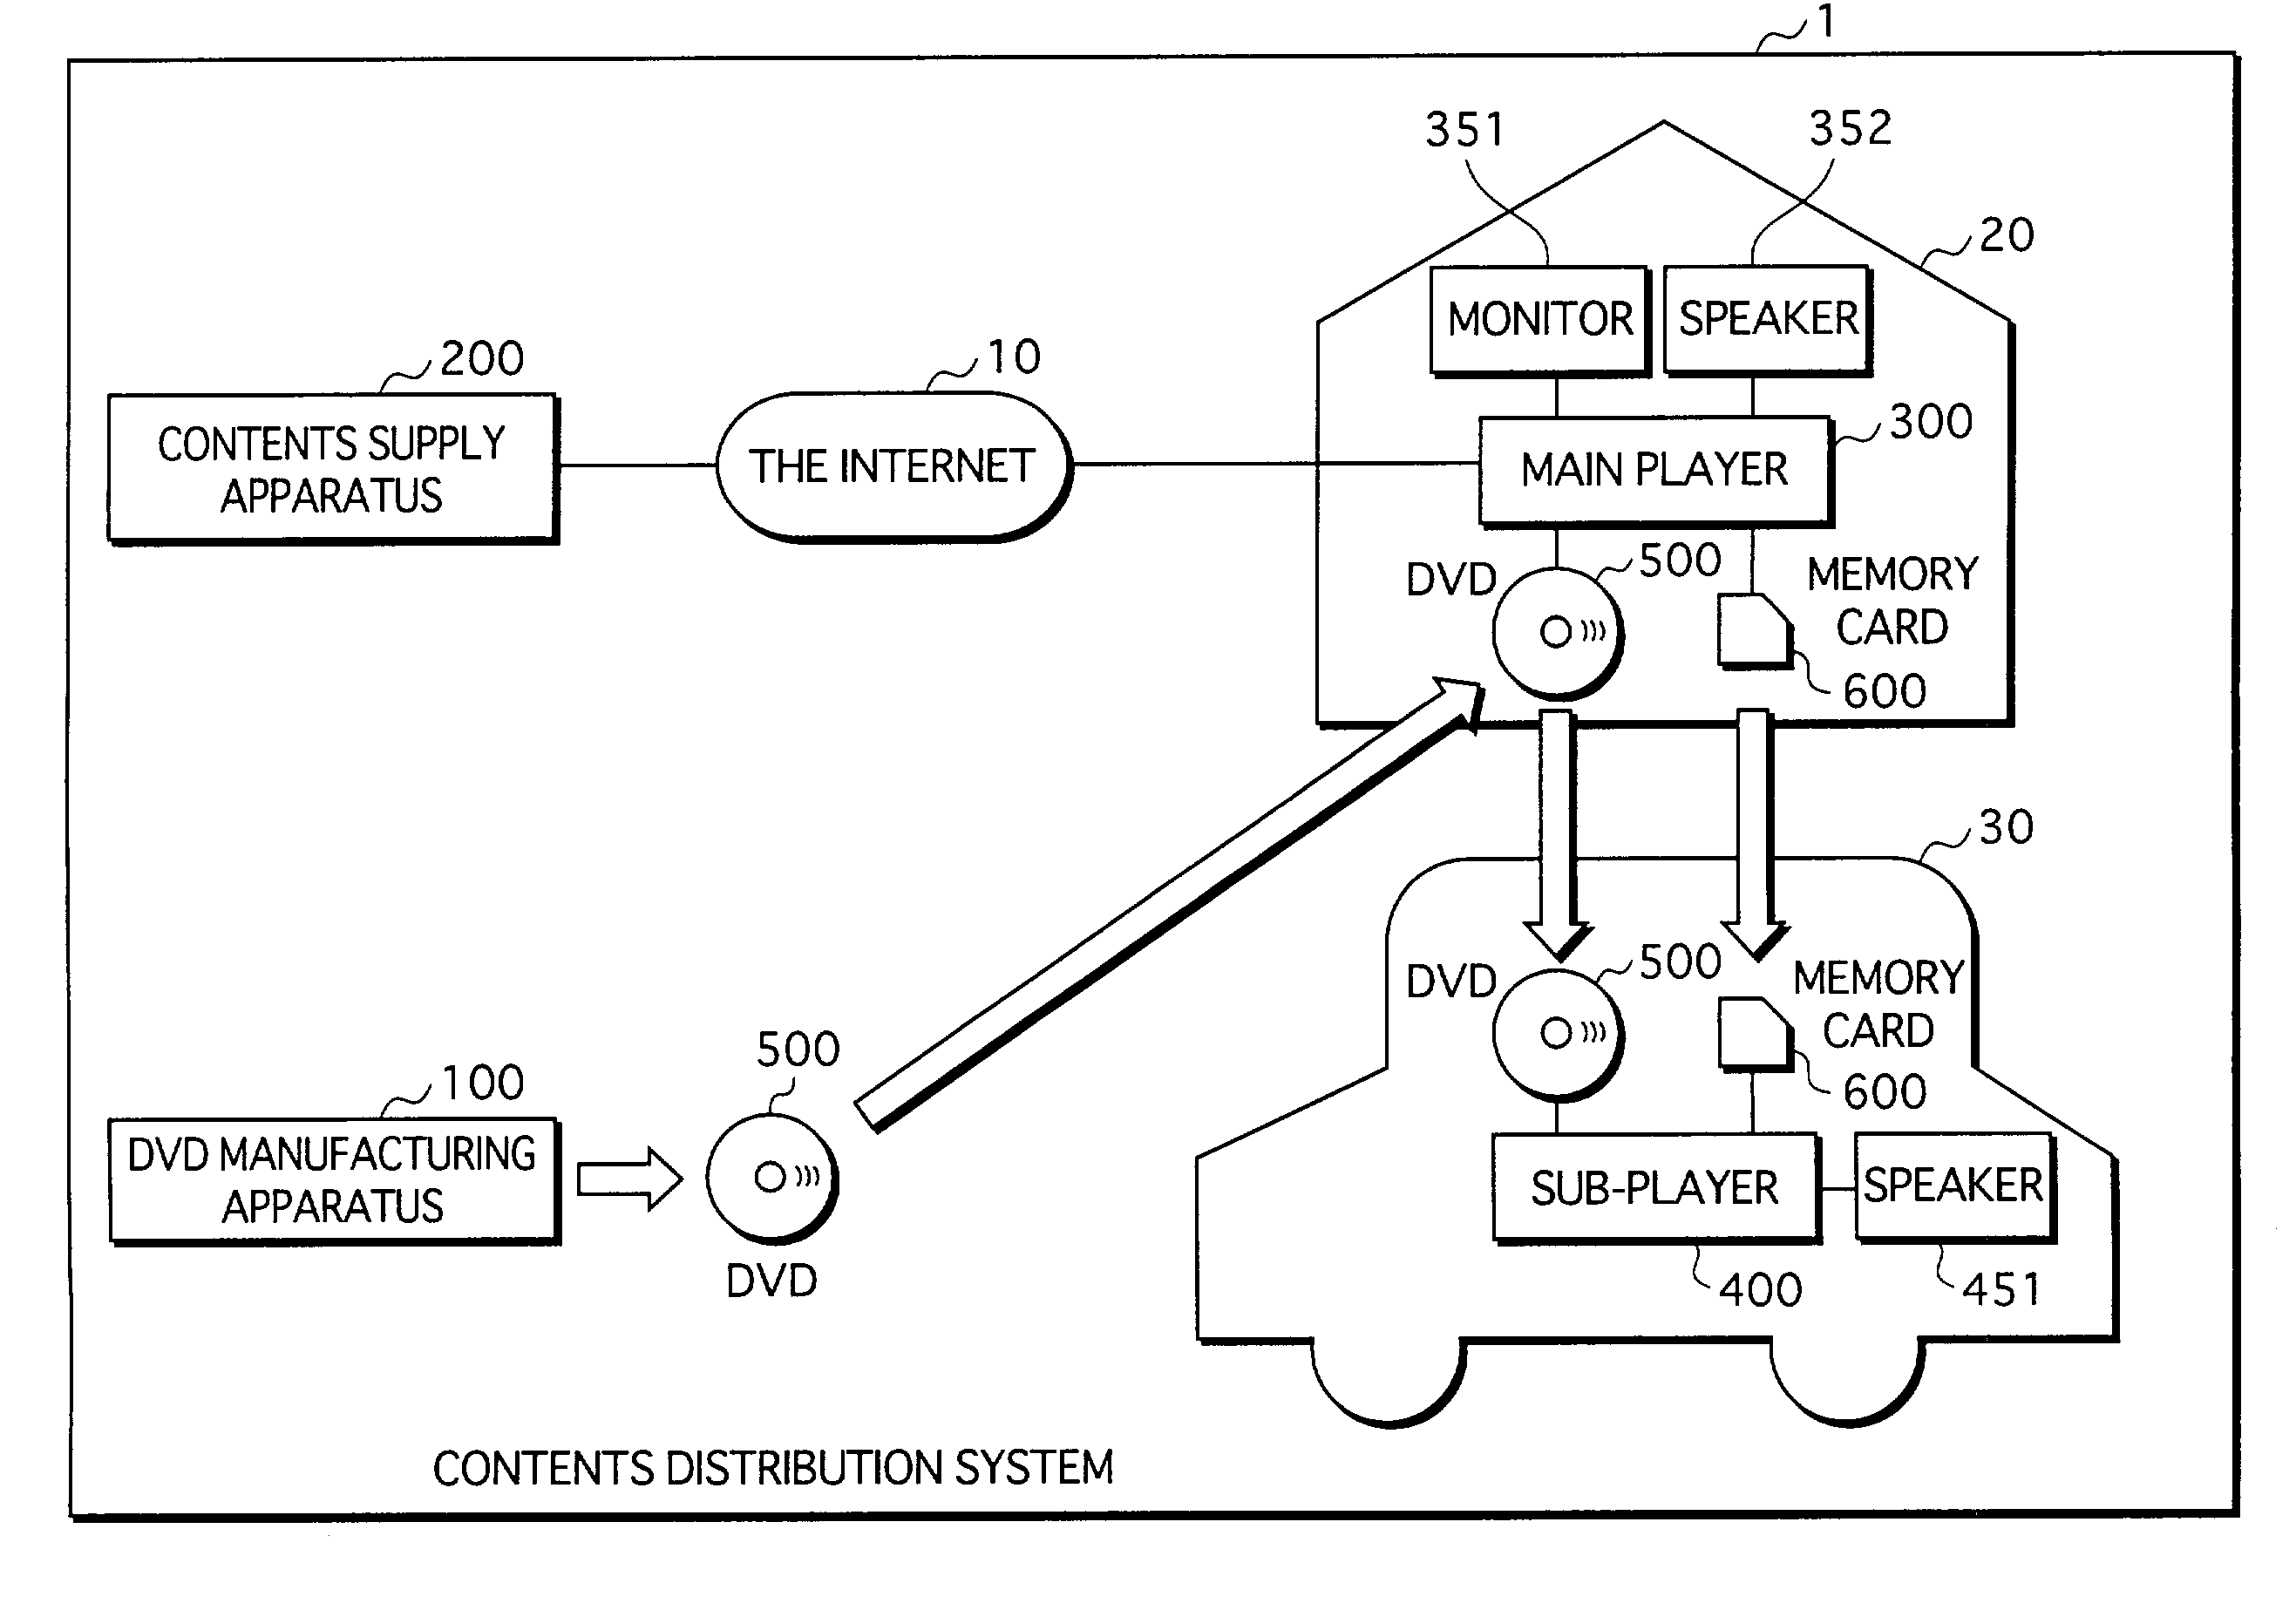 Contents distribution system